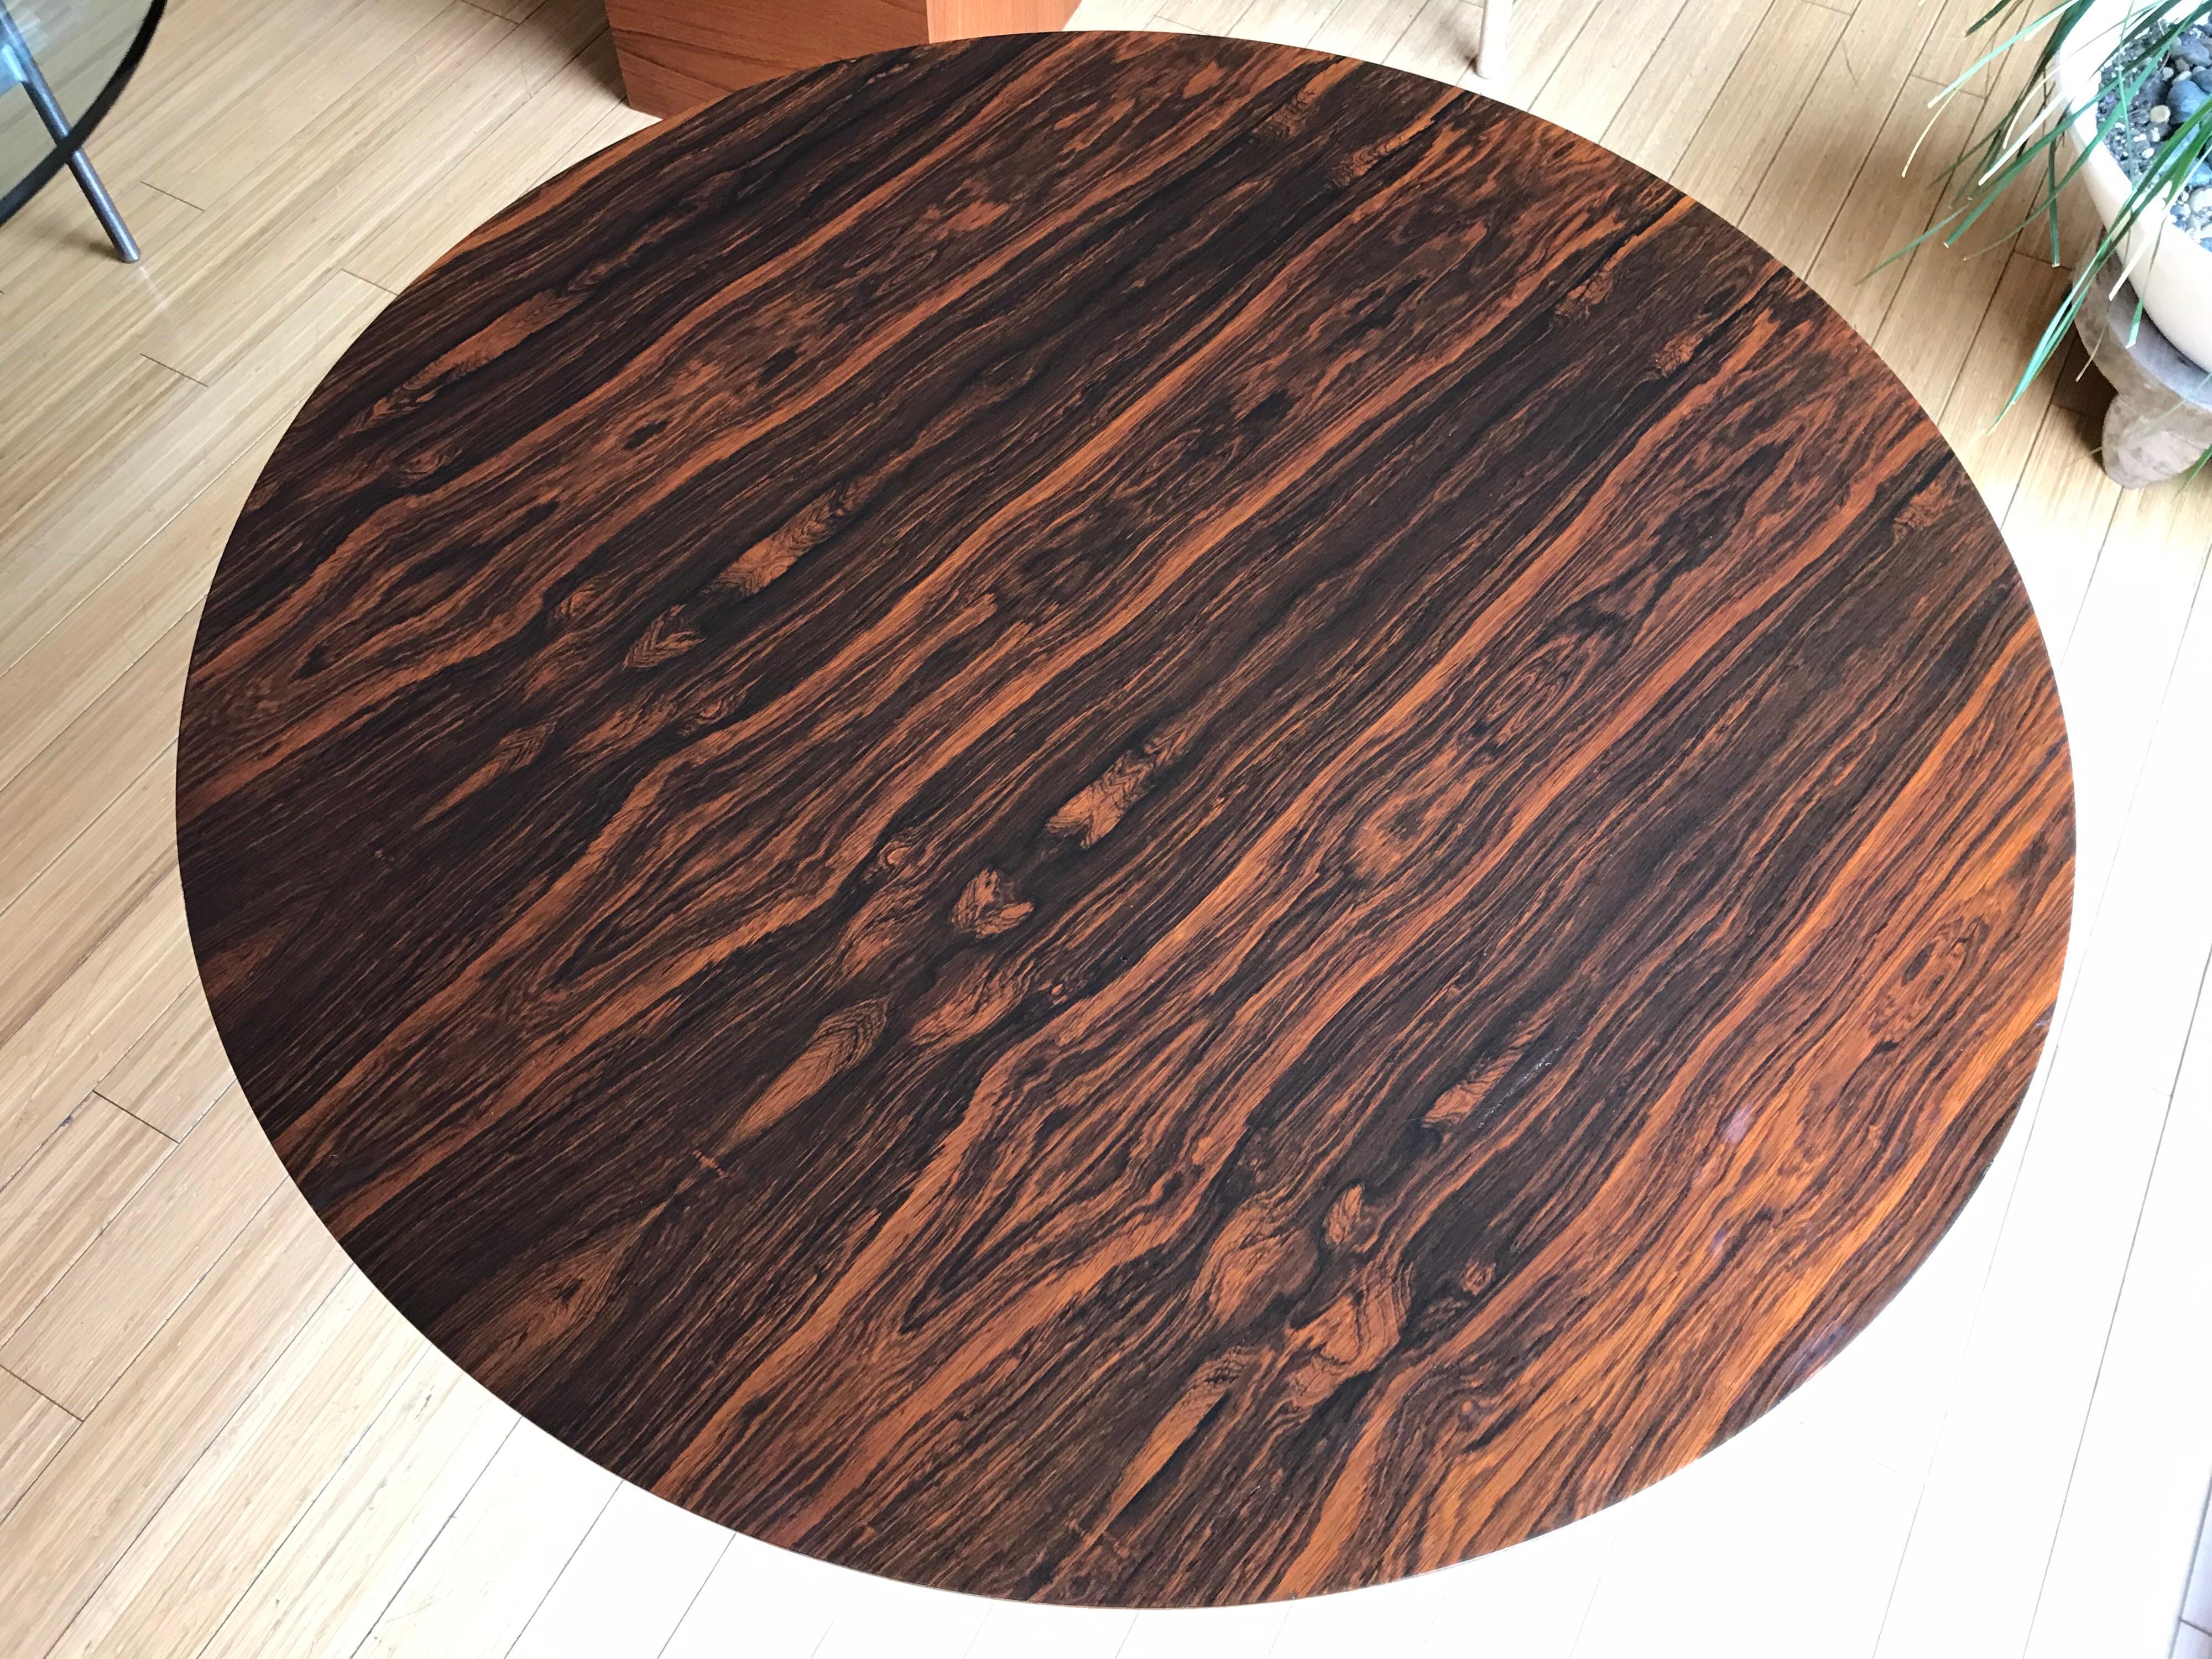 A handsome modernist design.
Made with a beautiful rosewood grain top, with steel and aluminum base on plastic glides and original screws.
Great for any occasion as a bistro or entry hall table etcetera.